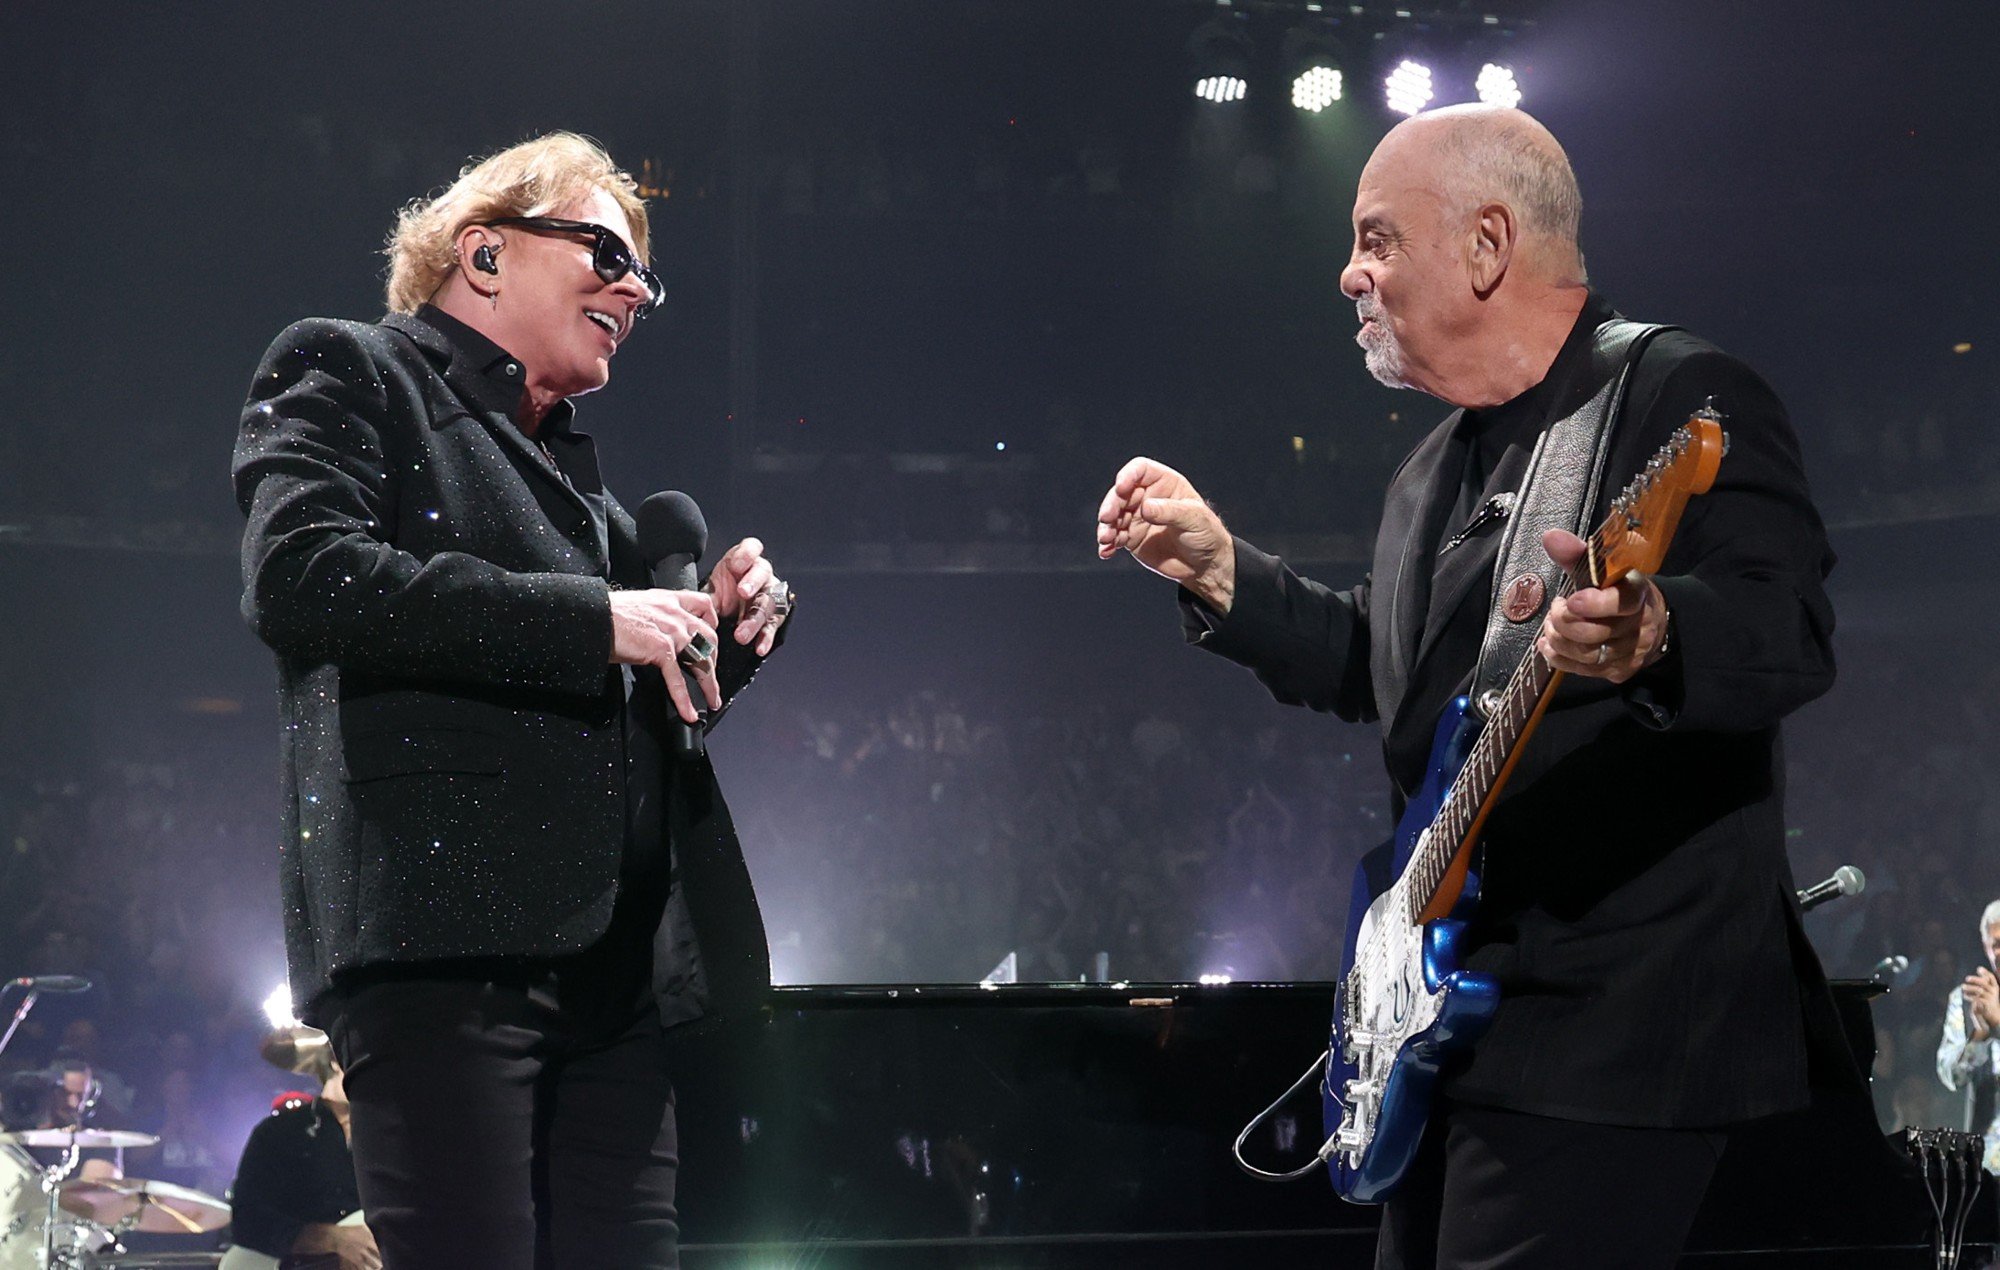 Axl Rose joins Billy Joel at final show of historic Madison Square Garden residency